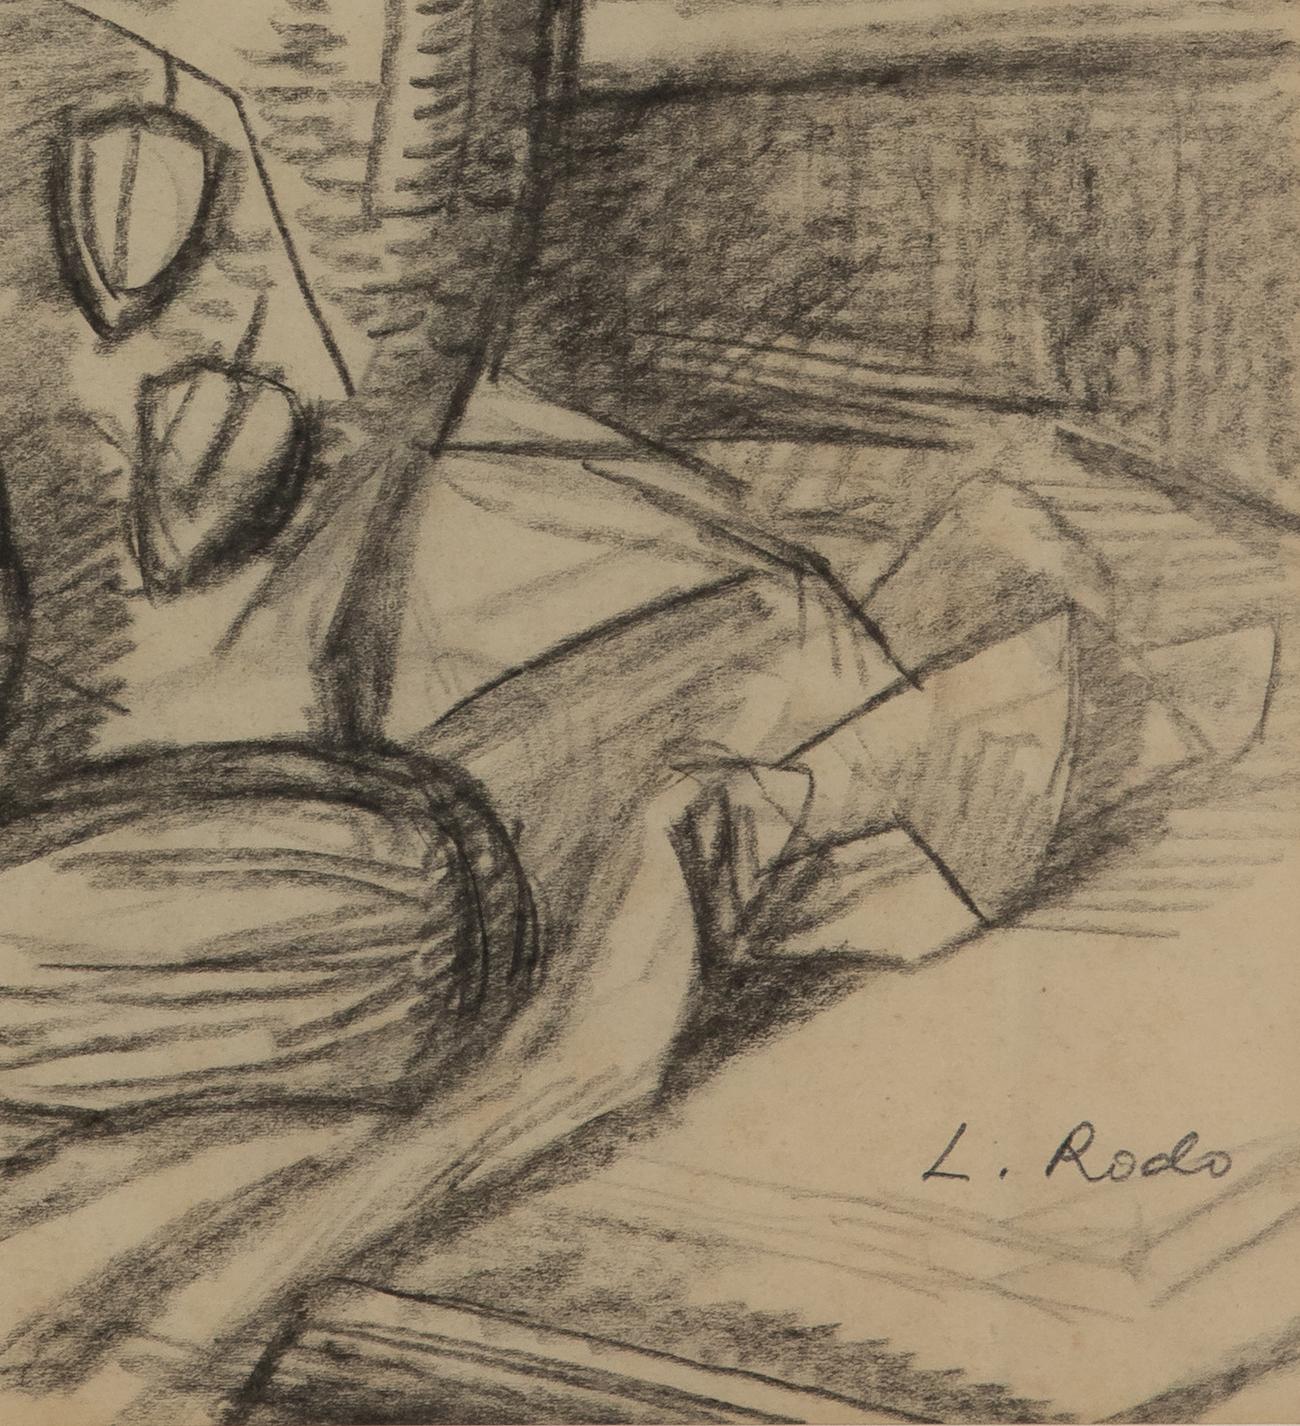 Still Life by Ludovic-Rodo Pissarro - Charcoal on paper For Sale 3